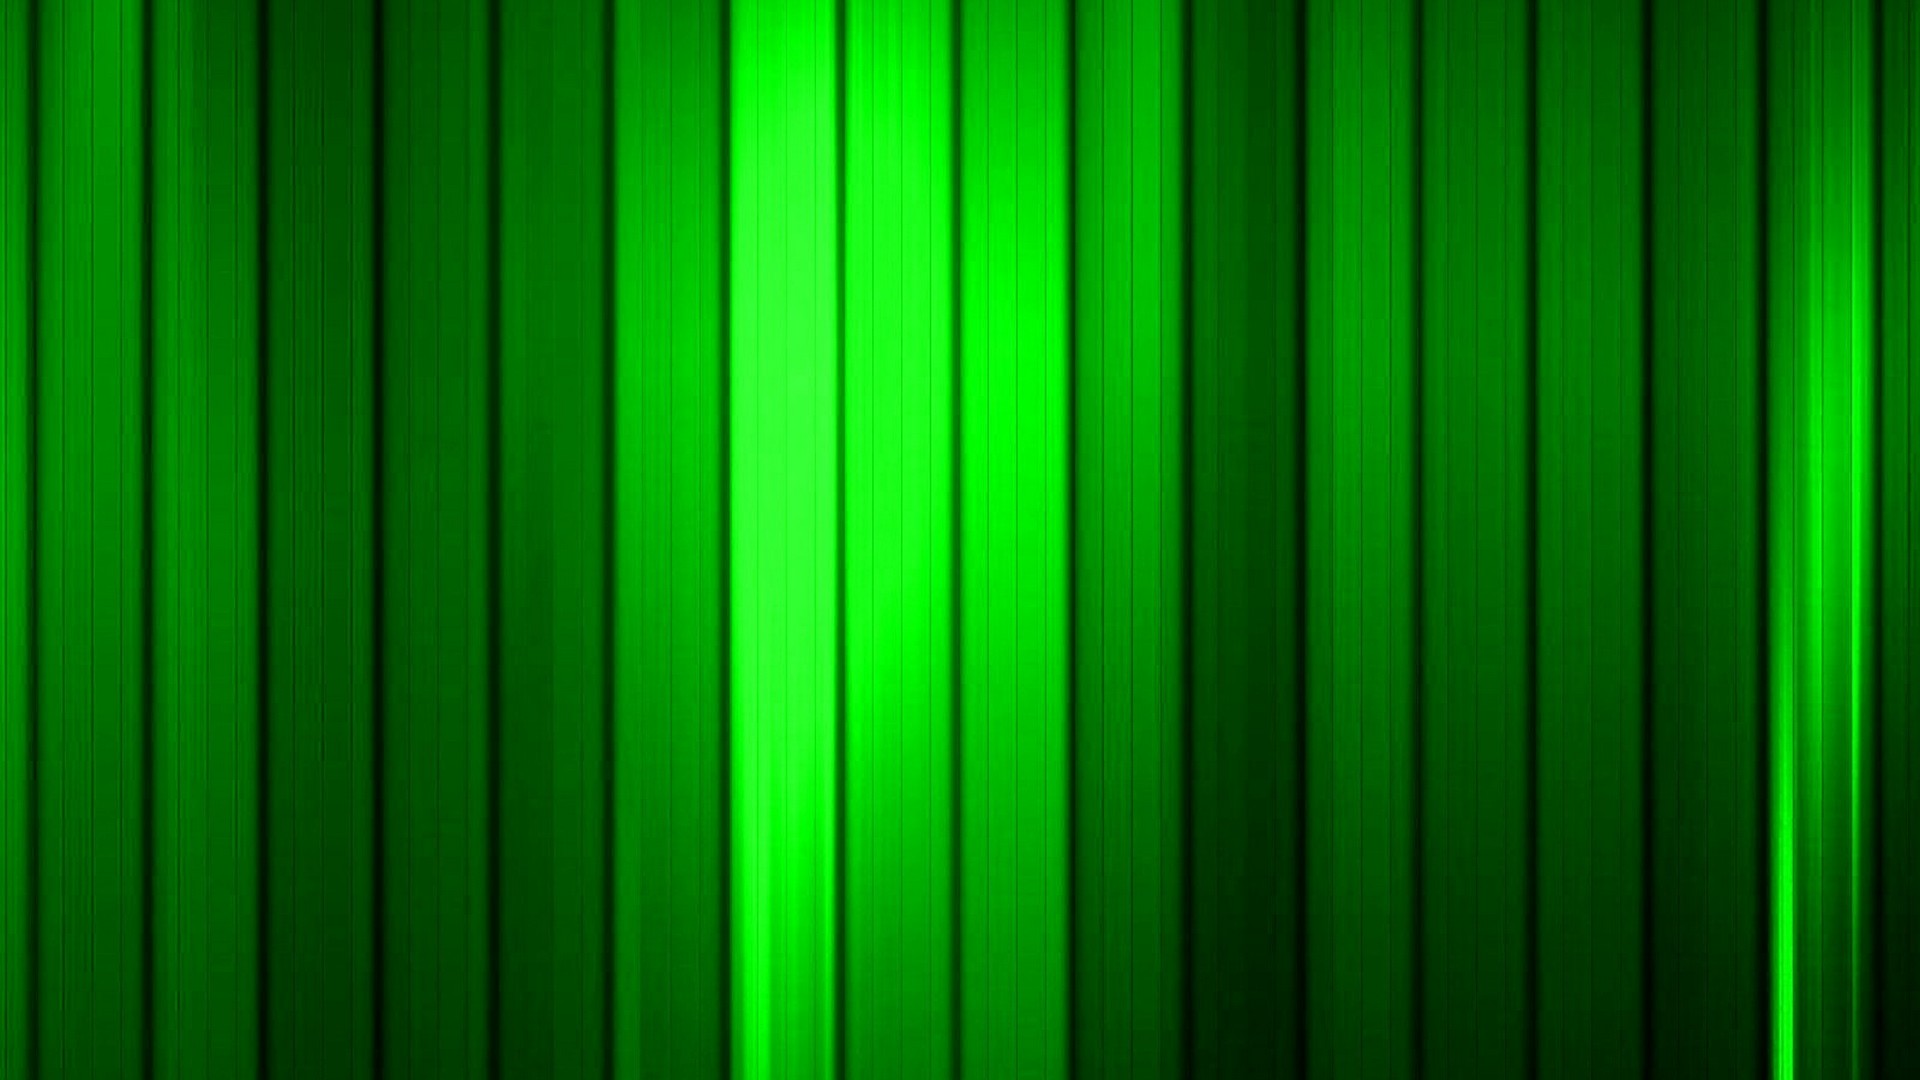 Wallpaper Green Neon Desktop with resolution 1920X1080 pixel. You can use this wallpaper as background for your desktop Computer Screensavers, Android or iPhone smartphones